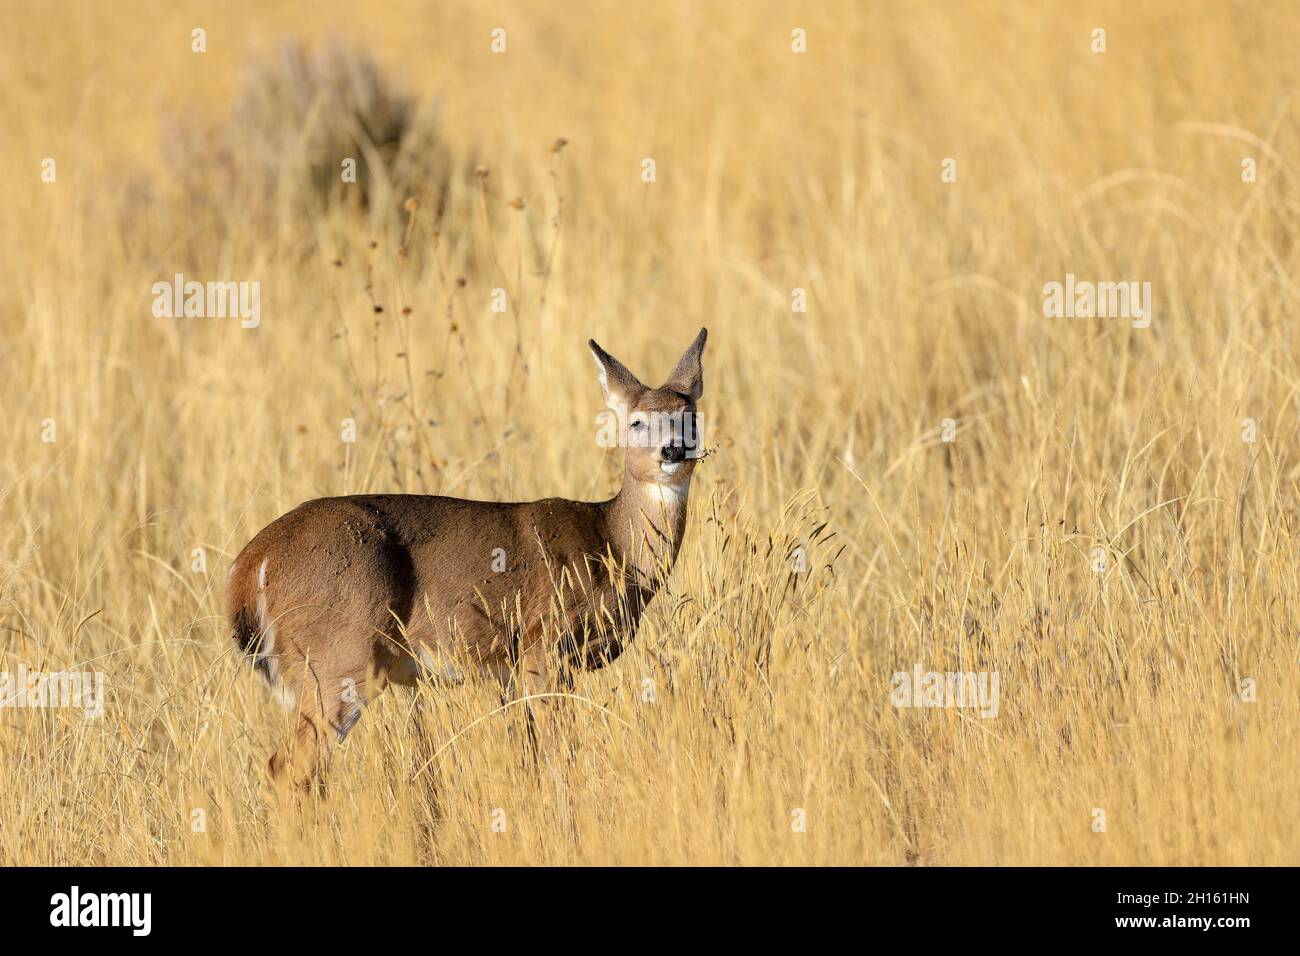 White-tailed deer doe in a meadow with tall brown grass Stock Photo